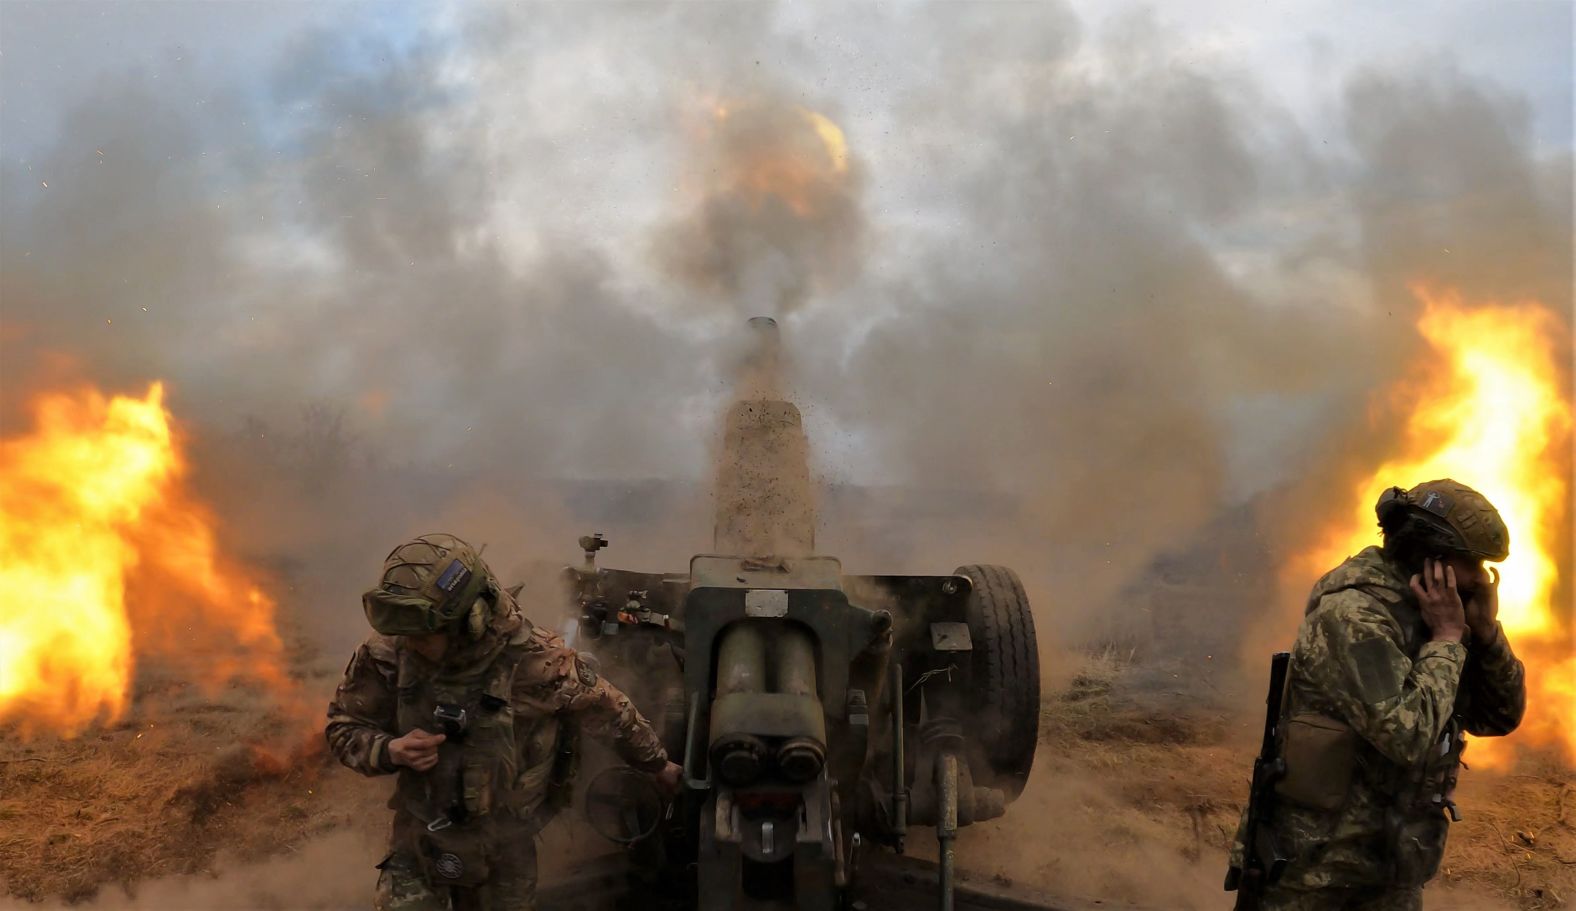 Ukrainian servicemen fire a howitzer at Russian positions near Bakhmut, Ukraine, on Tuesday, March 21. Weeks of Russian attacks have forced thousands of people from Bakhmut and decimated its infrastructure. Ukrainian forces <a href="index.php?page=&url=https%3A%2F%2Fwww.cnn.com%2F2023%2F03%2F23%2Feurope%2Fbakhmut-ukraine-counter-offensive-intl" target="_blank">continue to defend the city</a>.